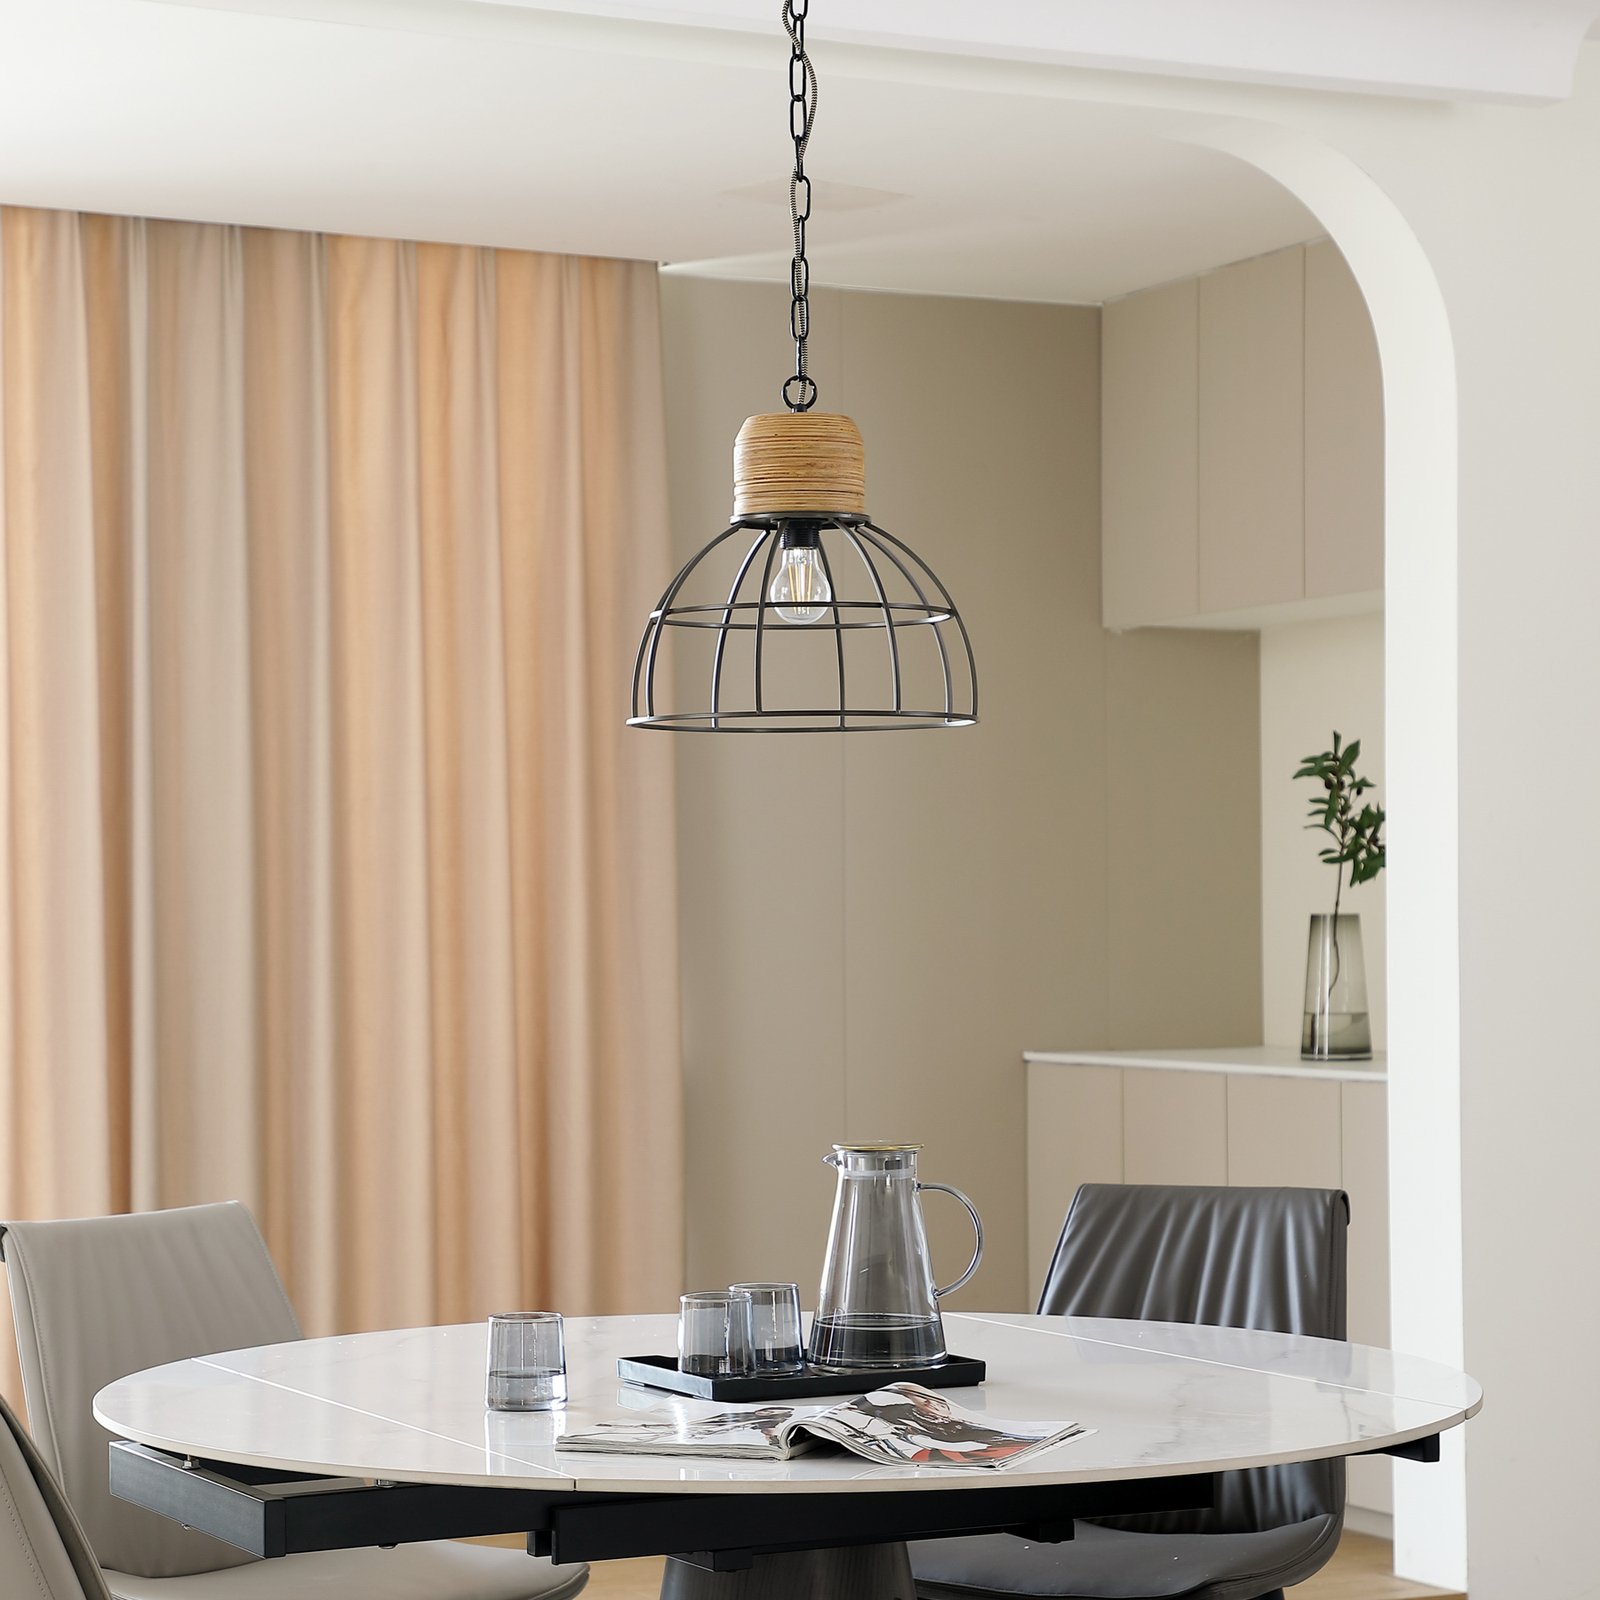 Lucande Arinthea pendant light with cage shade